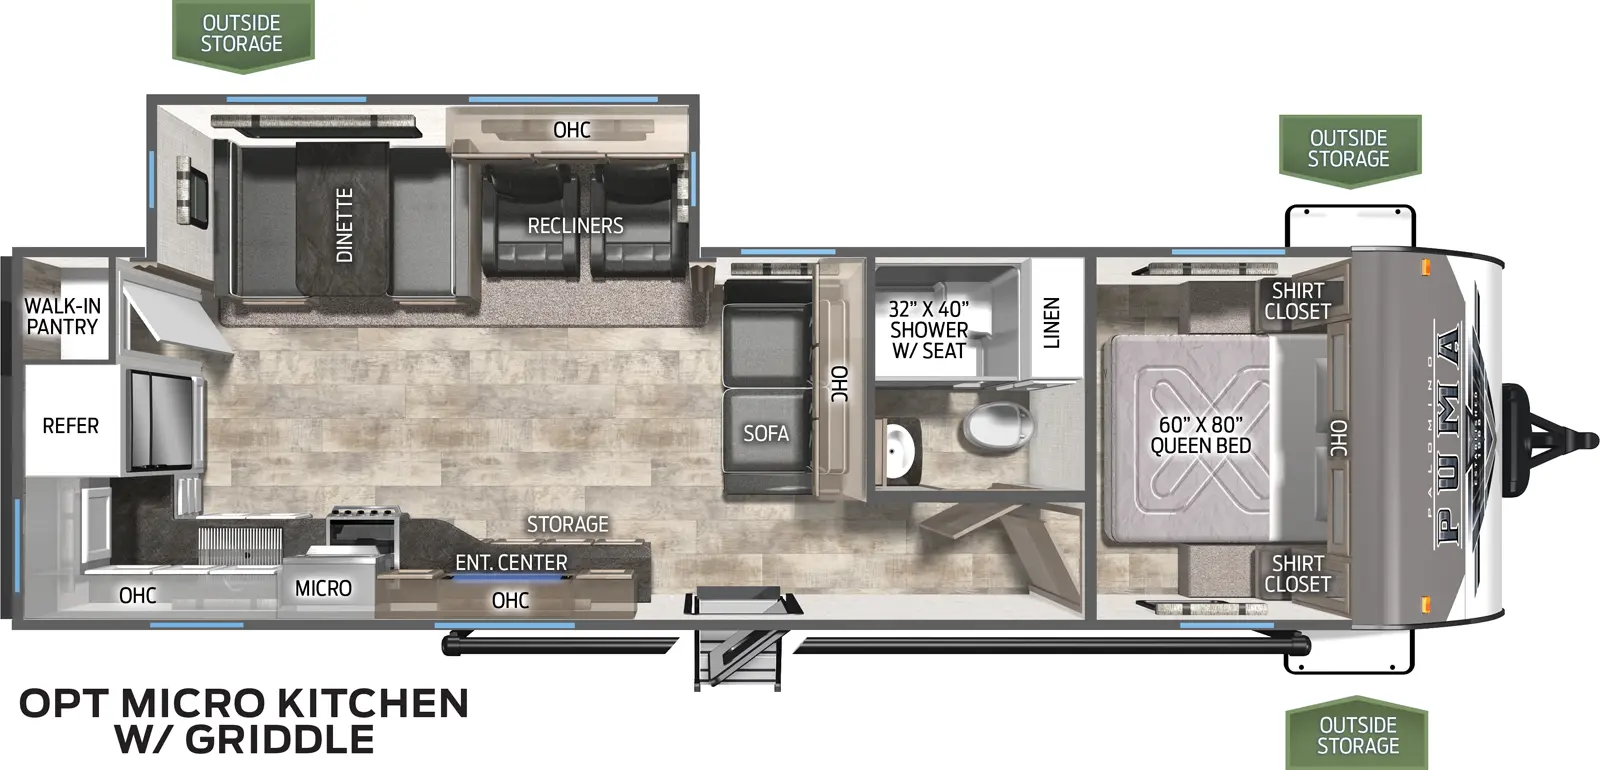 The 28RKQS has one slide out on the off door side. Exterior features include a 21 foot awning on the door side along with two exterior doors and a micro outside kitchen with griddle. Interior layout from front to back: front bedroom with queen bed; leads out to bathroom on the right; three cushion sofa; slide out containing two recliners and a booth dinette; entertainment center; rear kitchen with a cooktop stove, microwave, residential refrigerator and a walk in pantry.